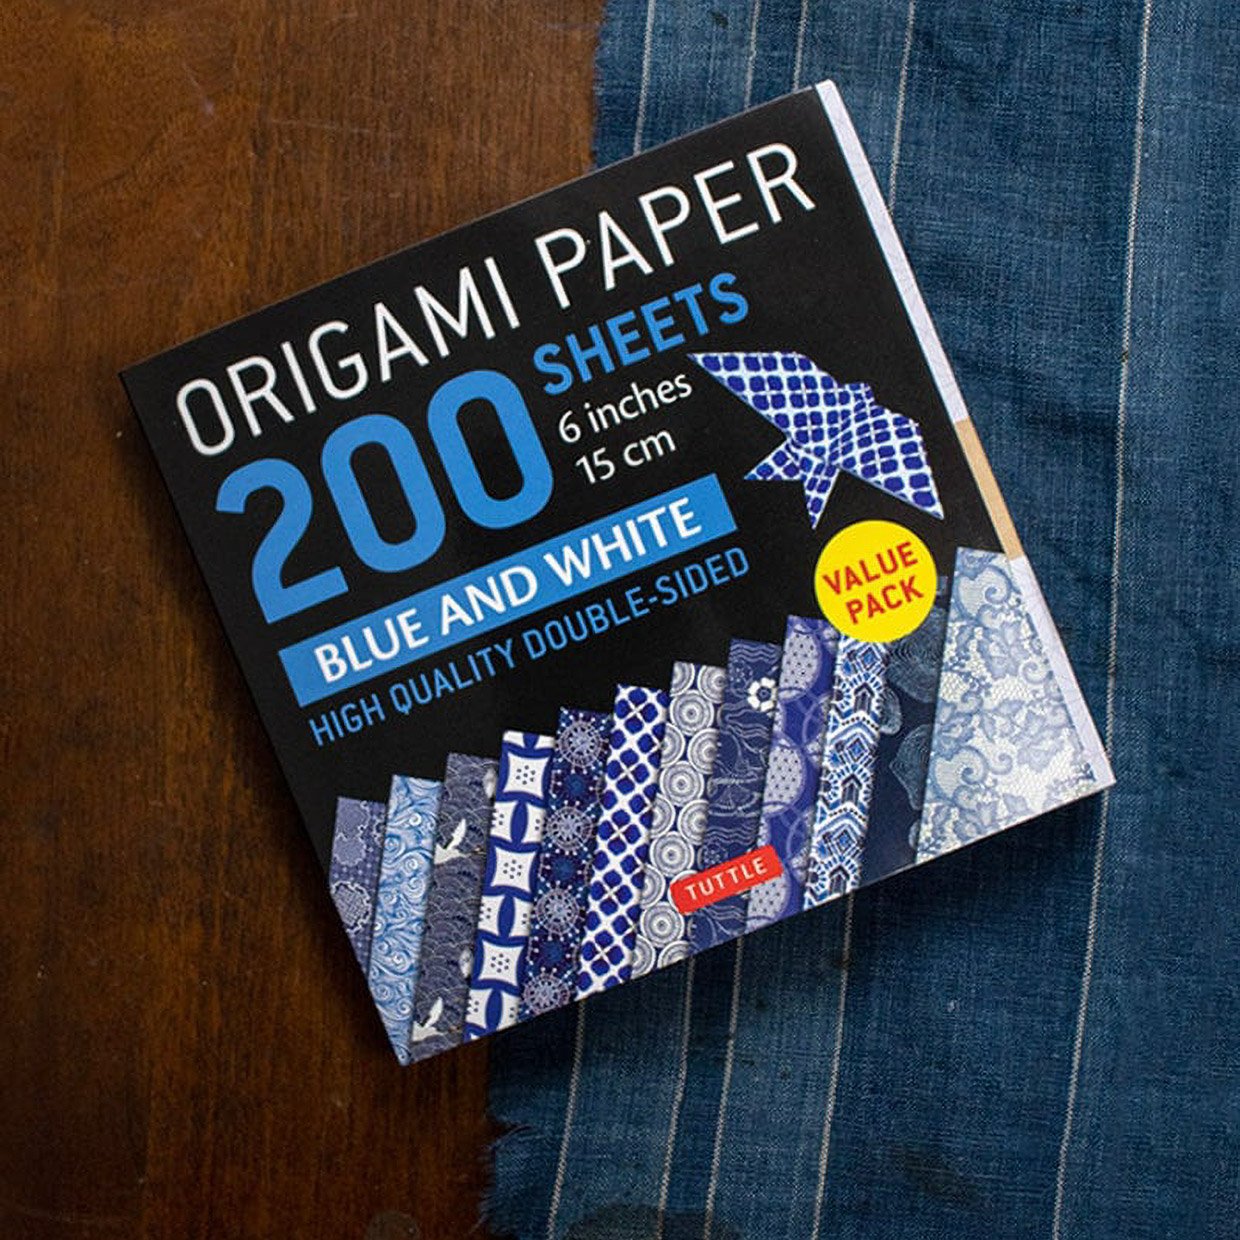 Japanese Origami Paper Sheets